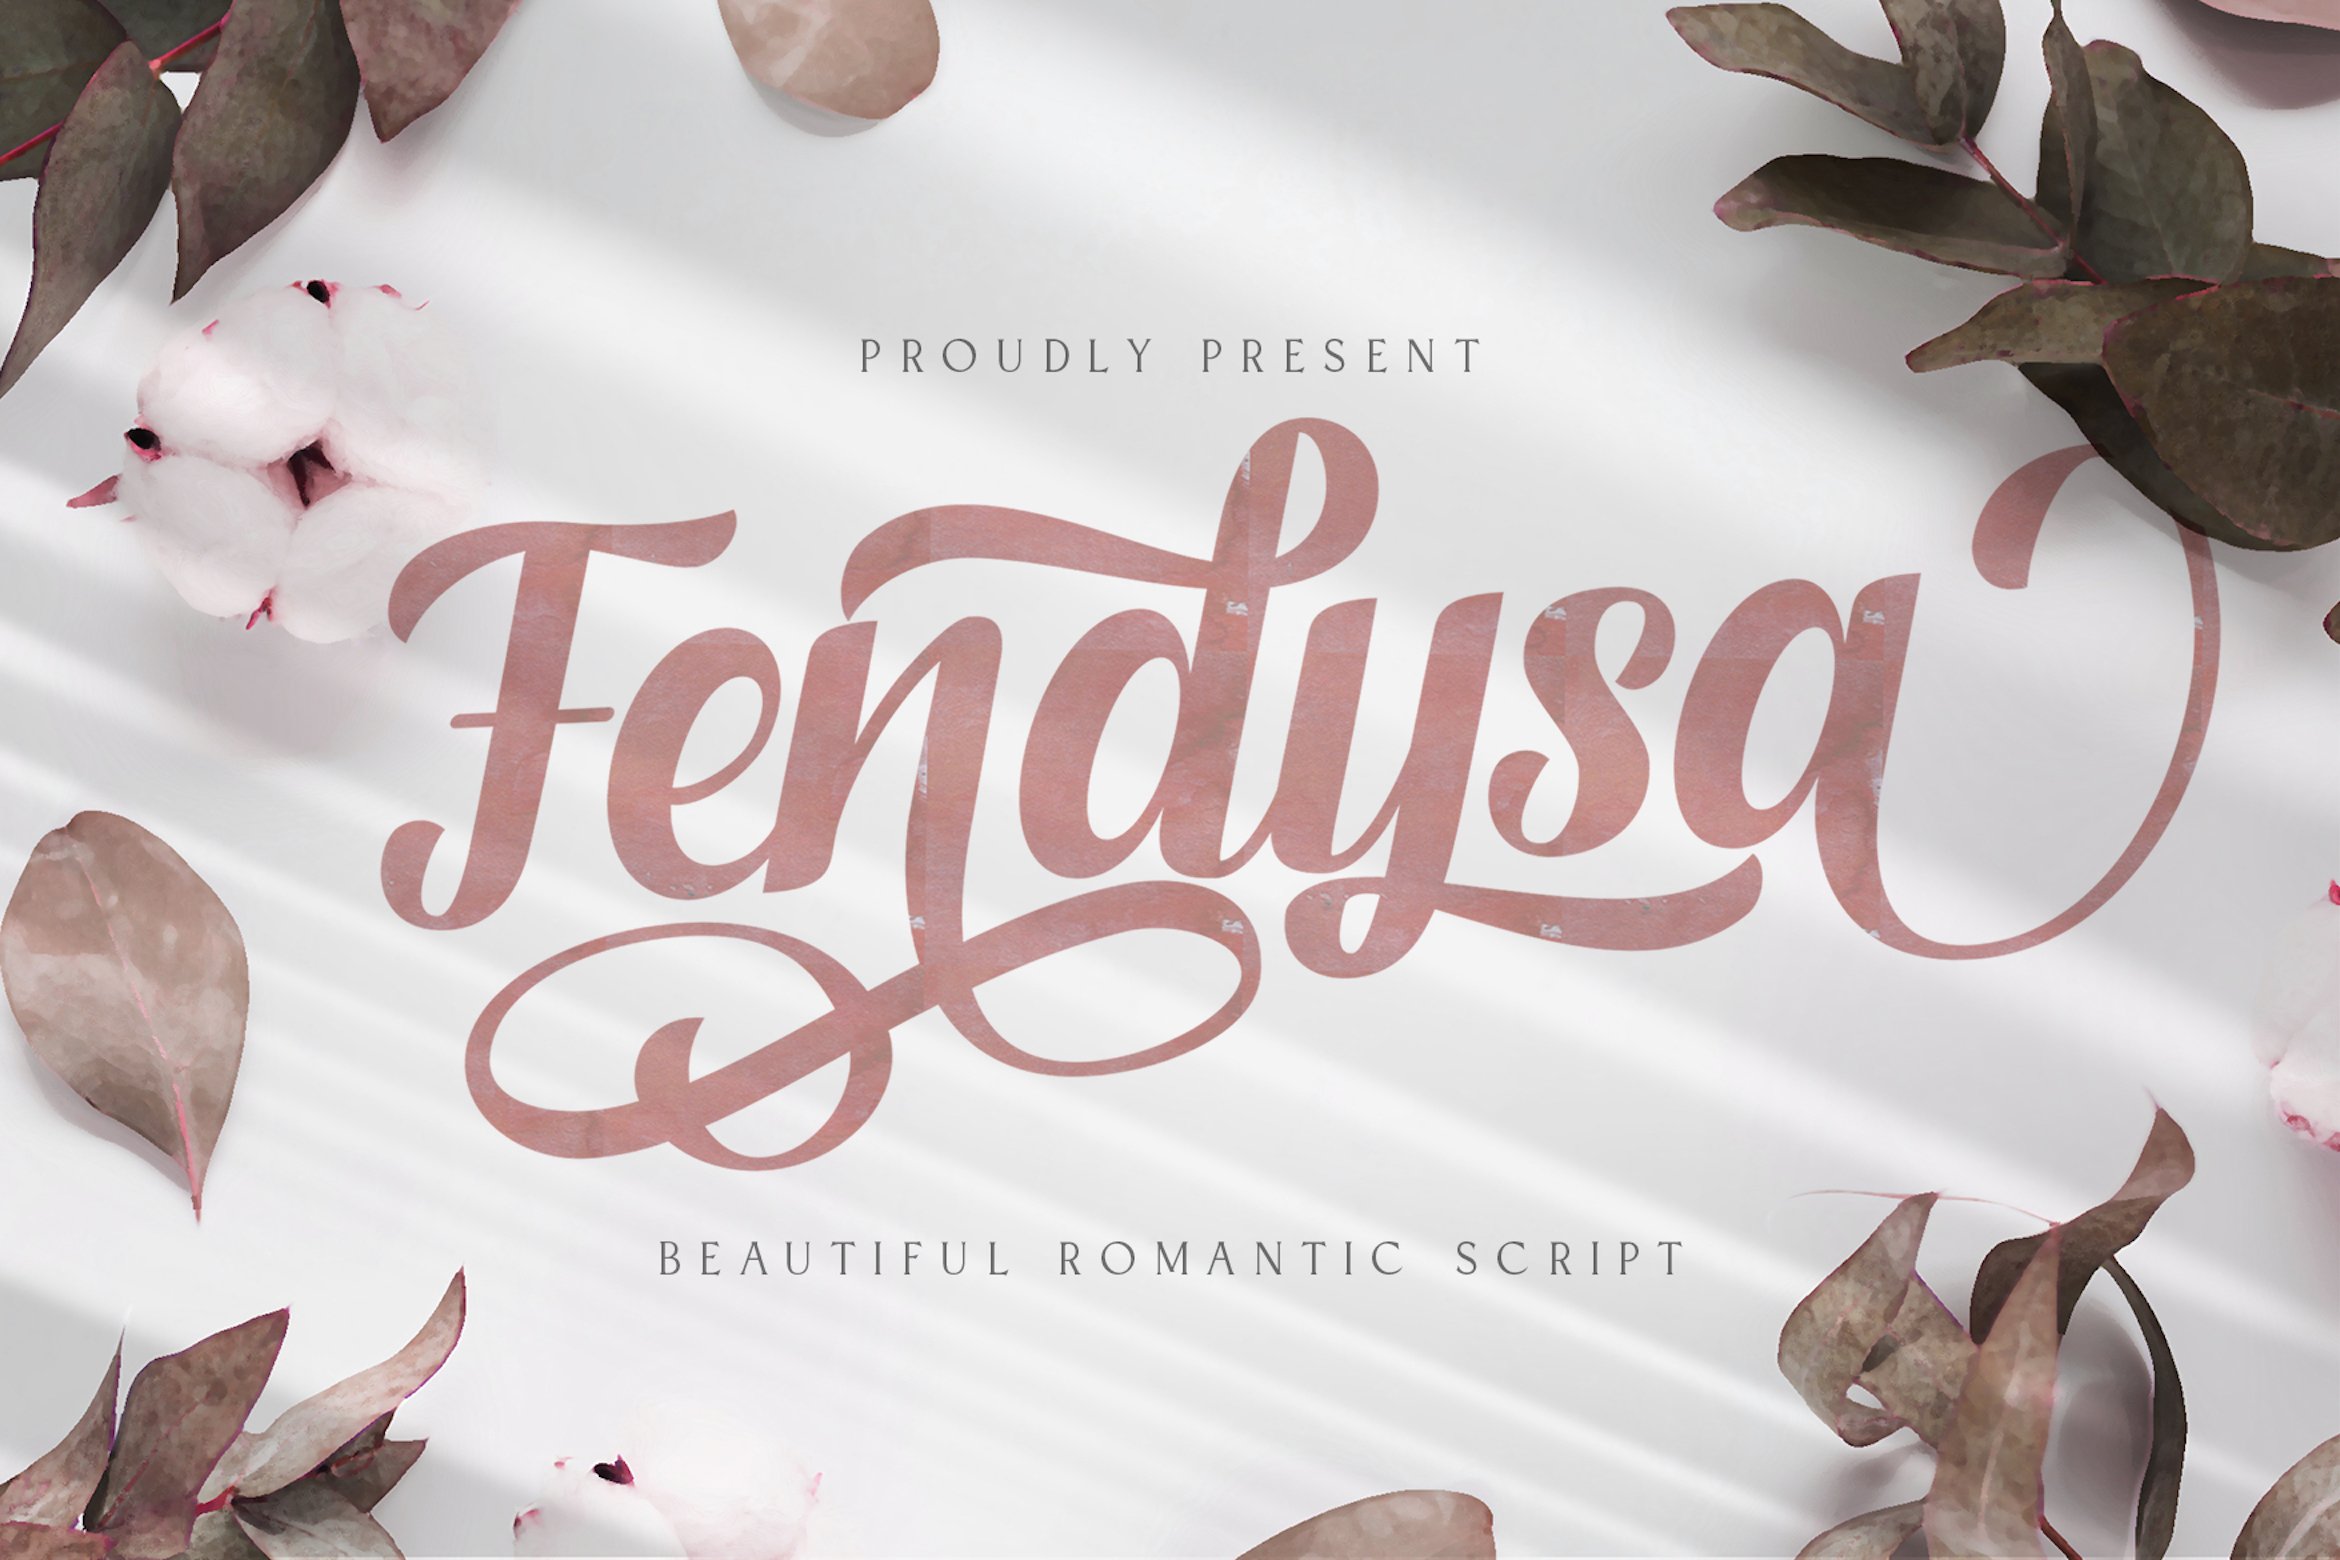 Fendysa - Calligraphy Font cover image.